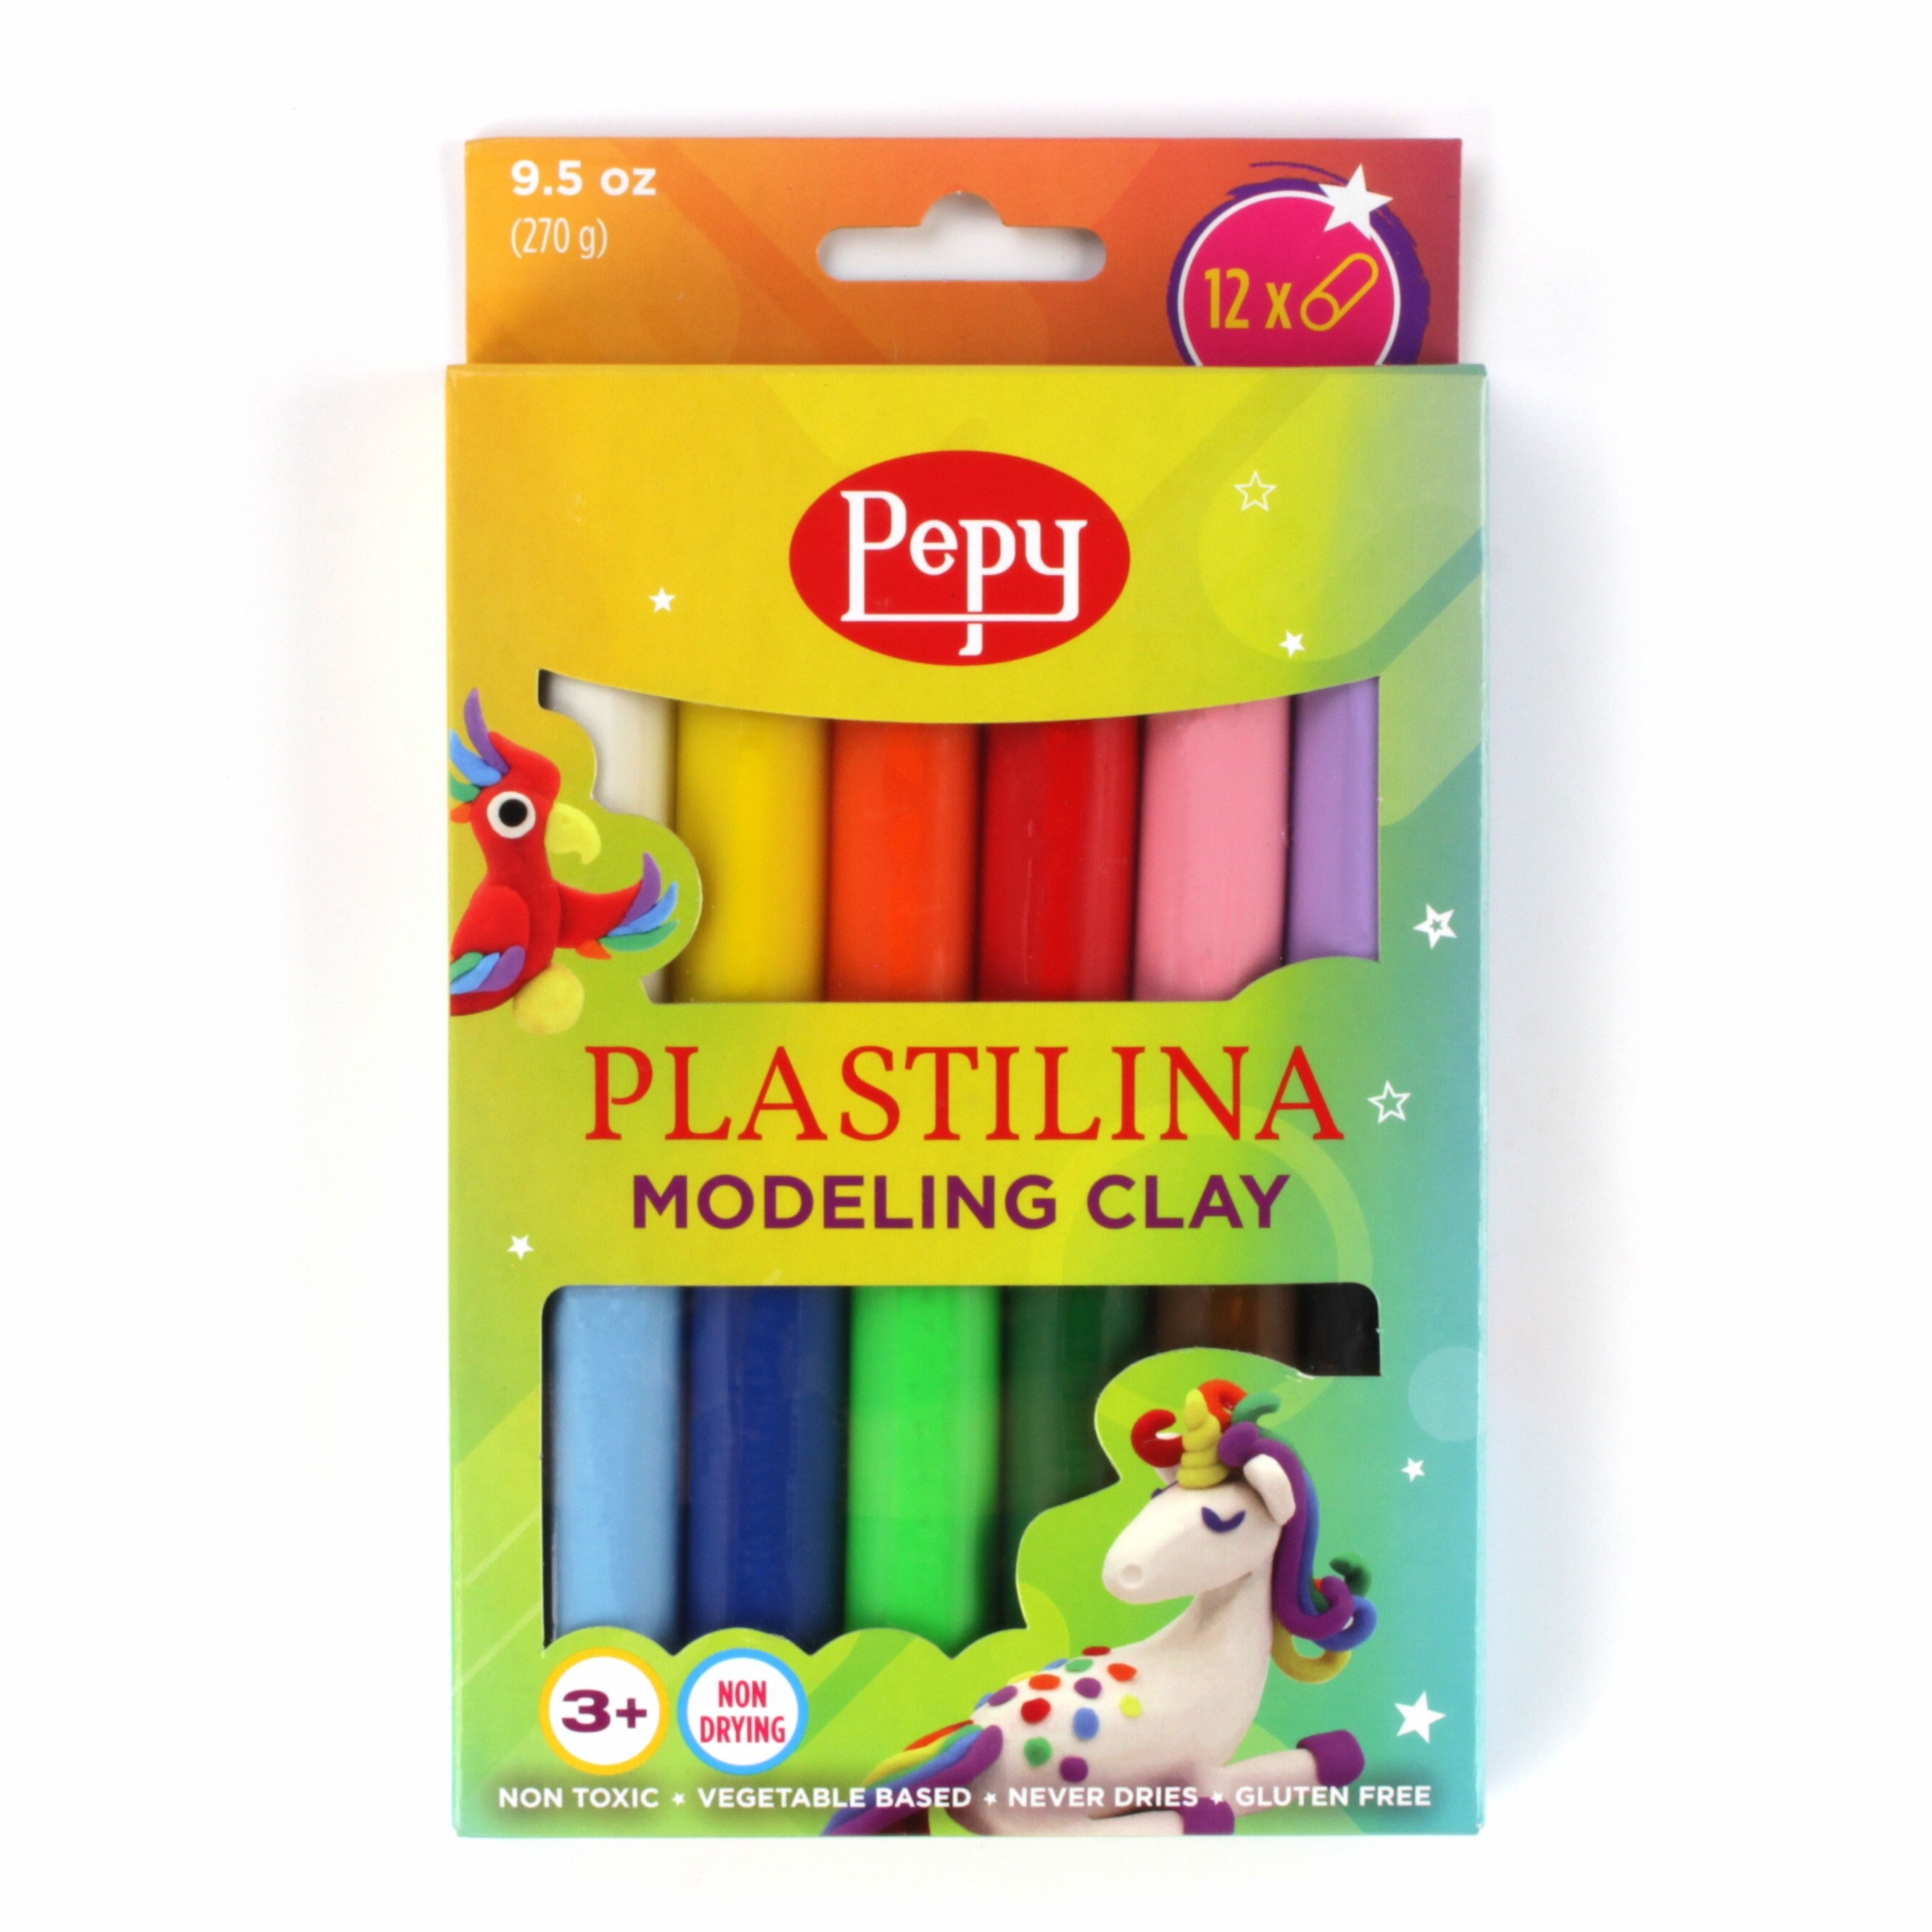 Pepy Plastilina Reusable and Non-drying Modeling Clay Box of 12-color  Sticks, 0.8 Ounce Each, Perfect for Arts and Crafts Projects 